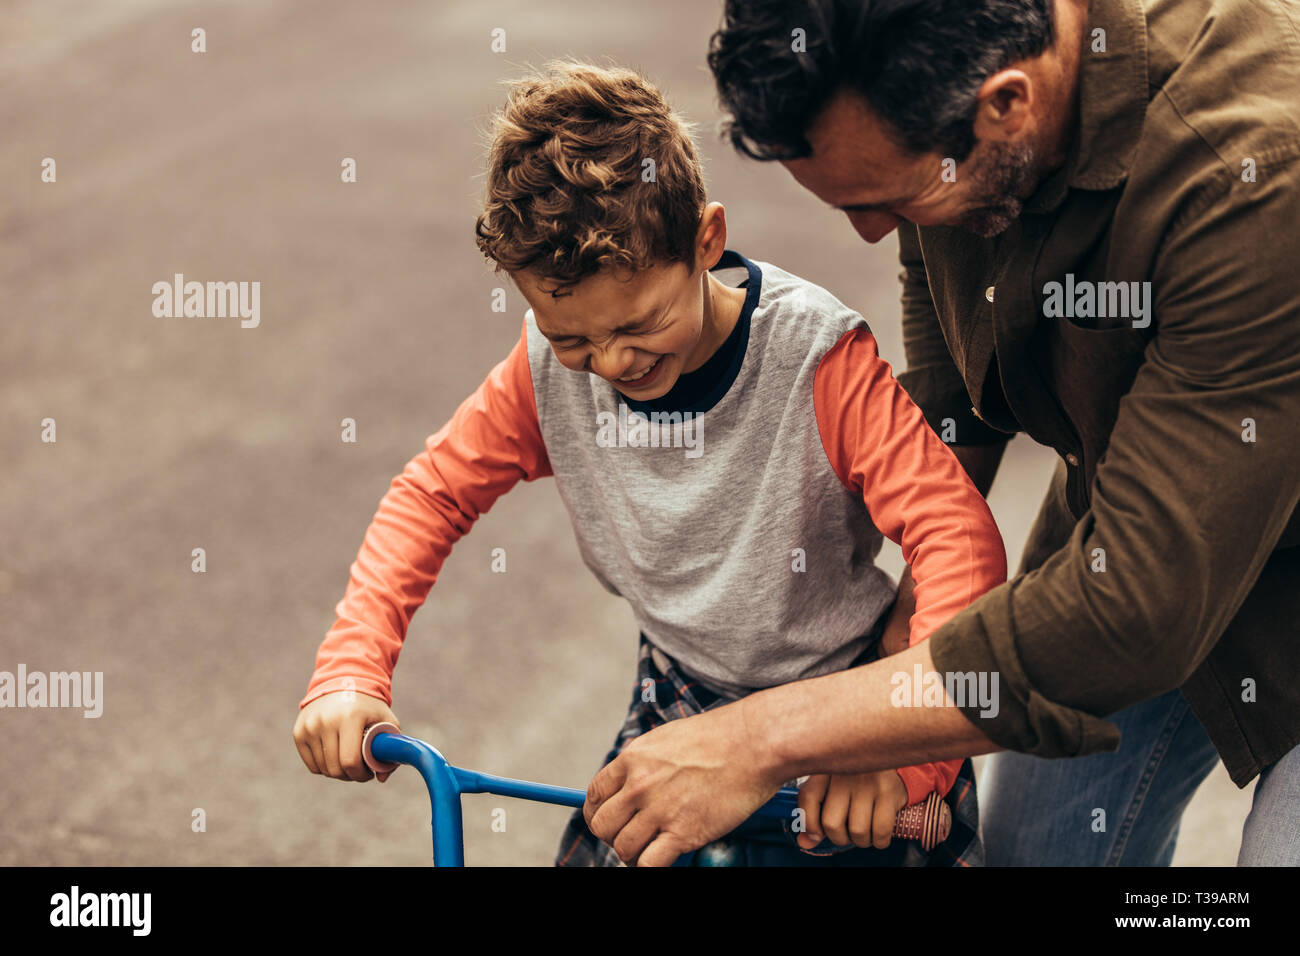 Man holding the bicycle while his son learns to ride it. Boy excited to ride a bicycle. Stock Photo